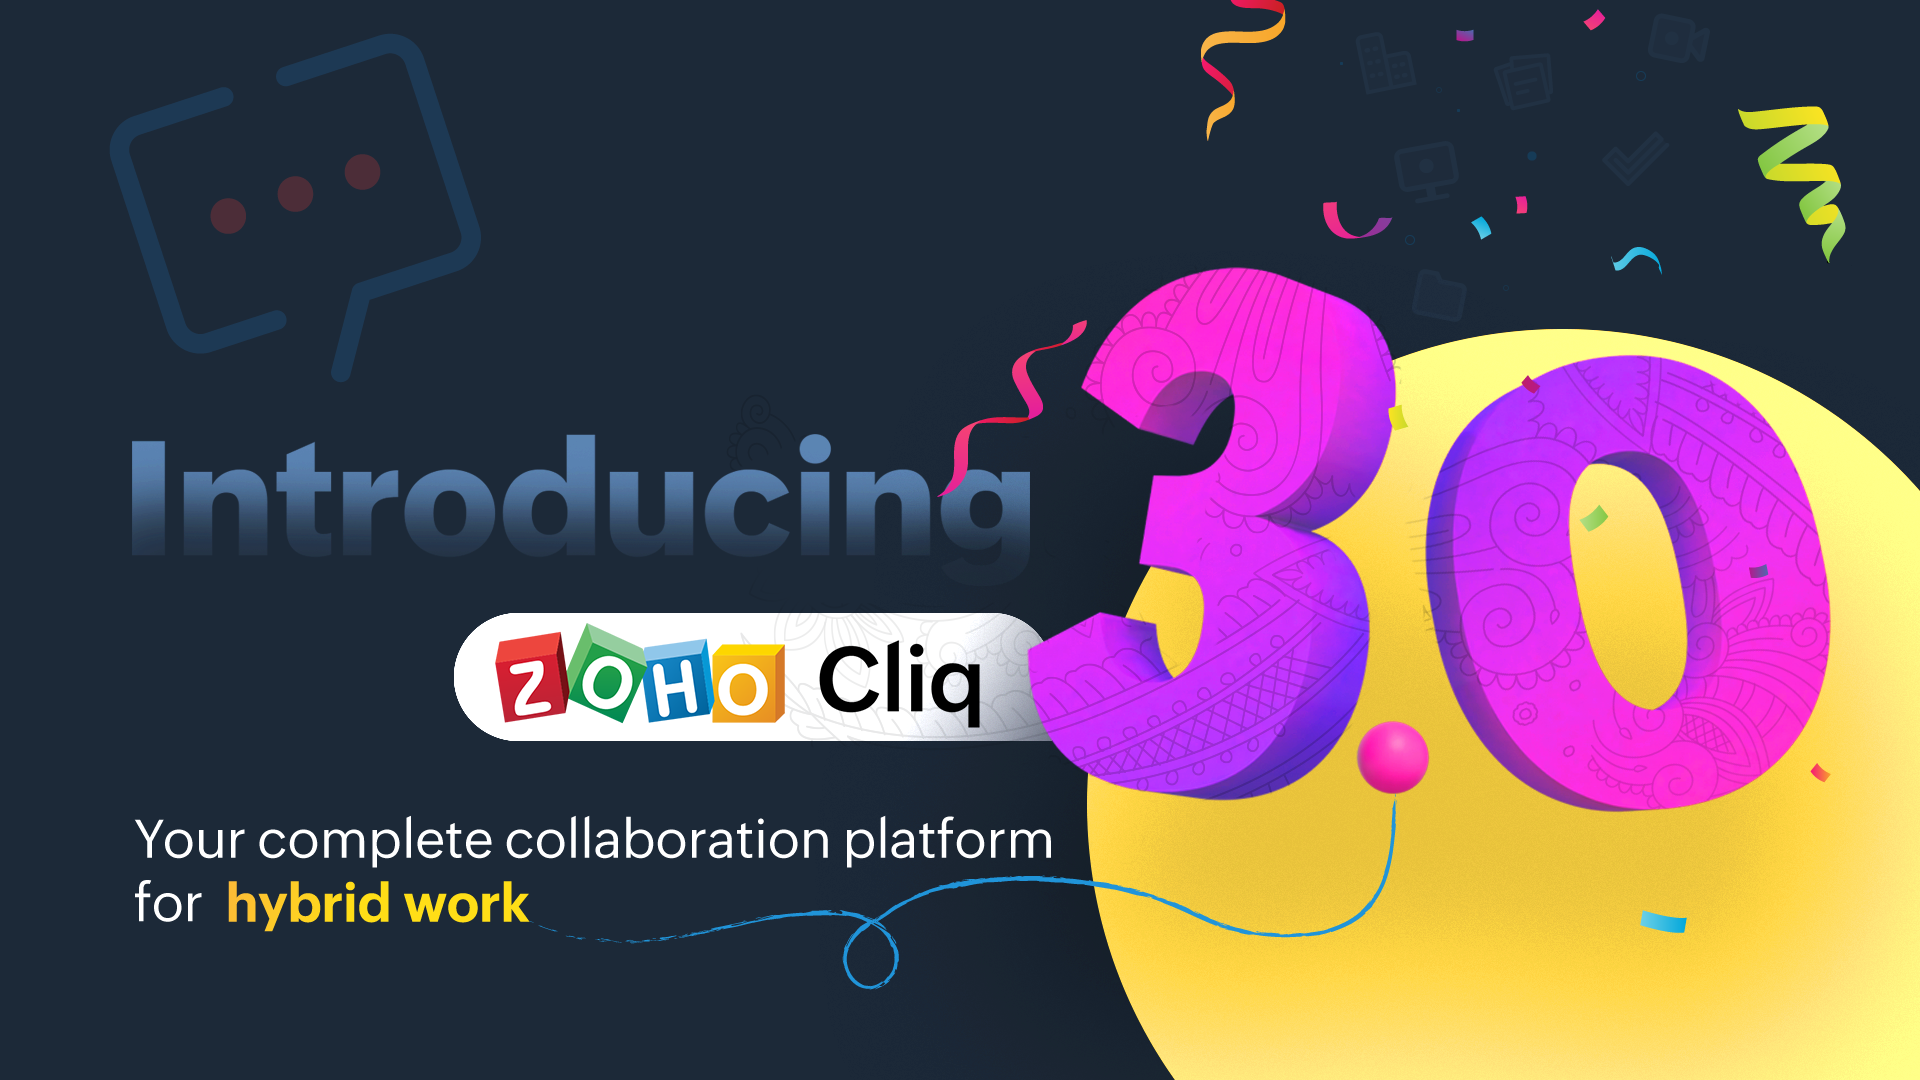 Introducing Zoho Cliq 3.0: Your complete collaboration platform for hybrid work